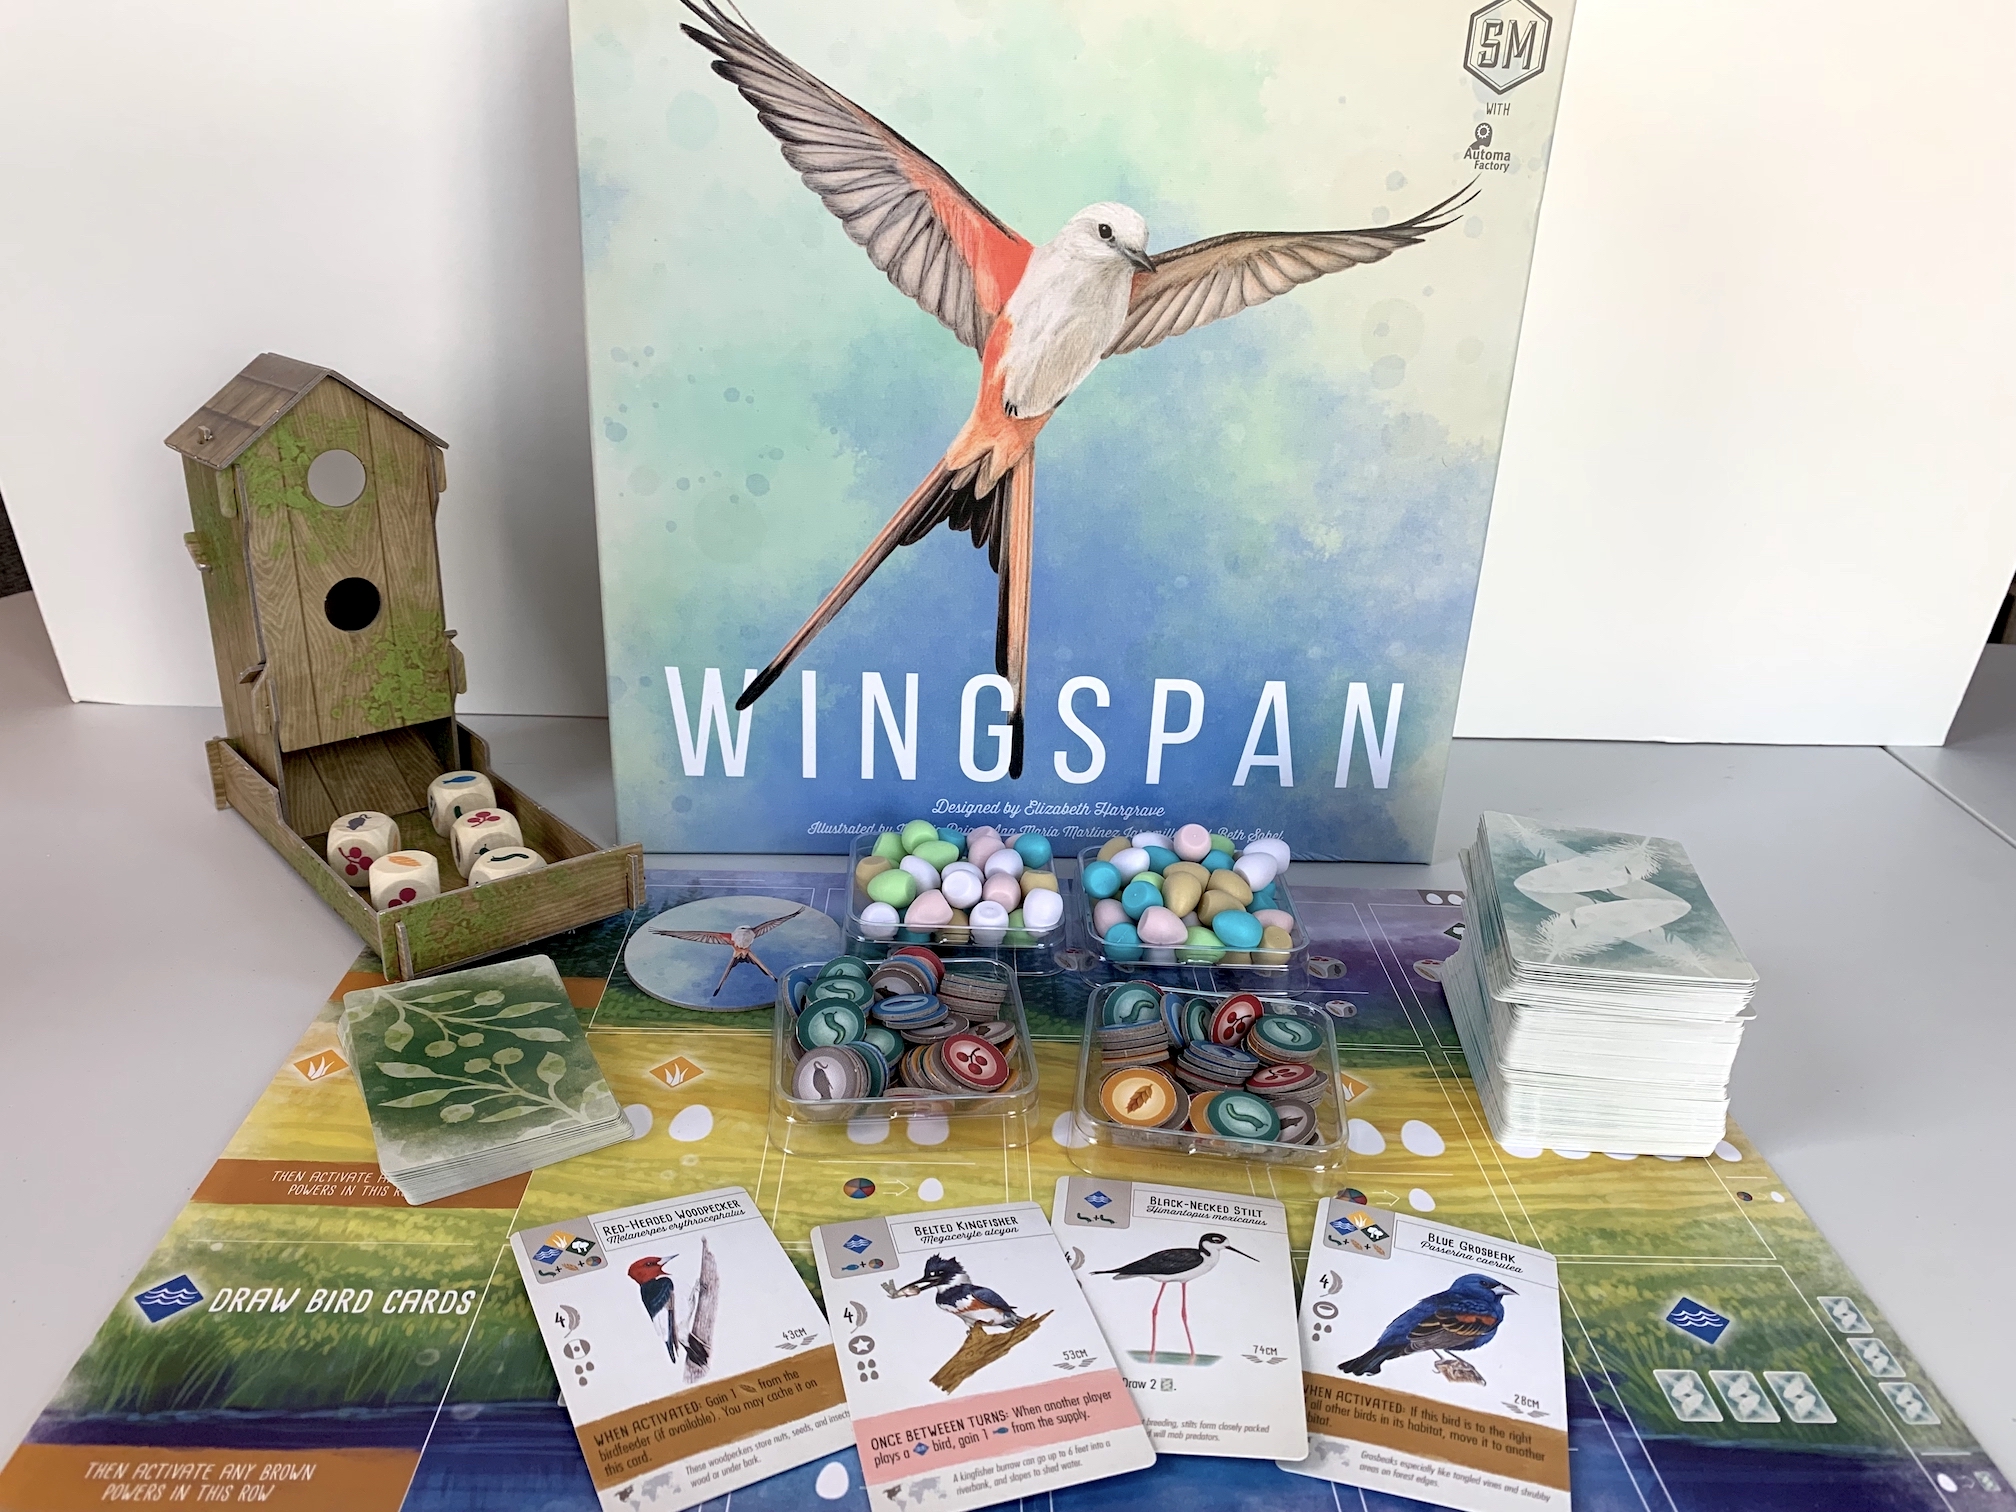 2019's “Board Game of the Year” goes to Just One